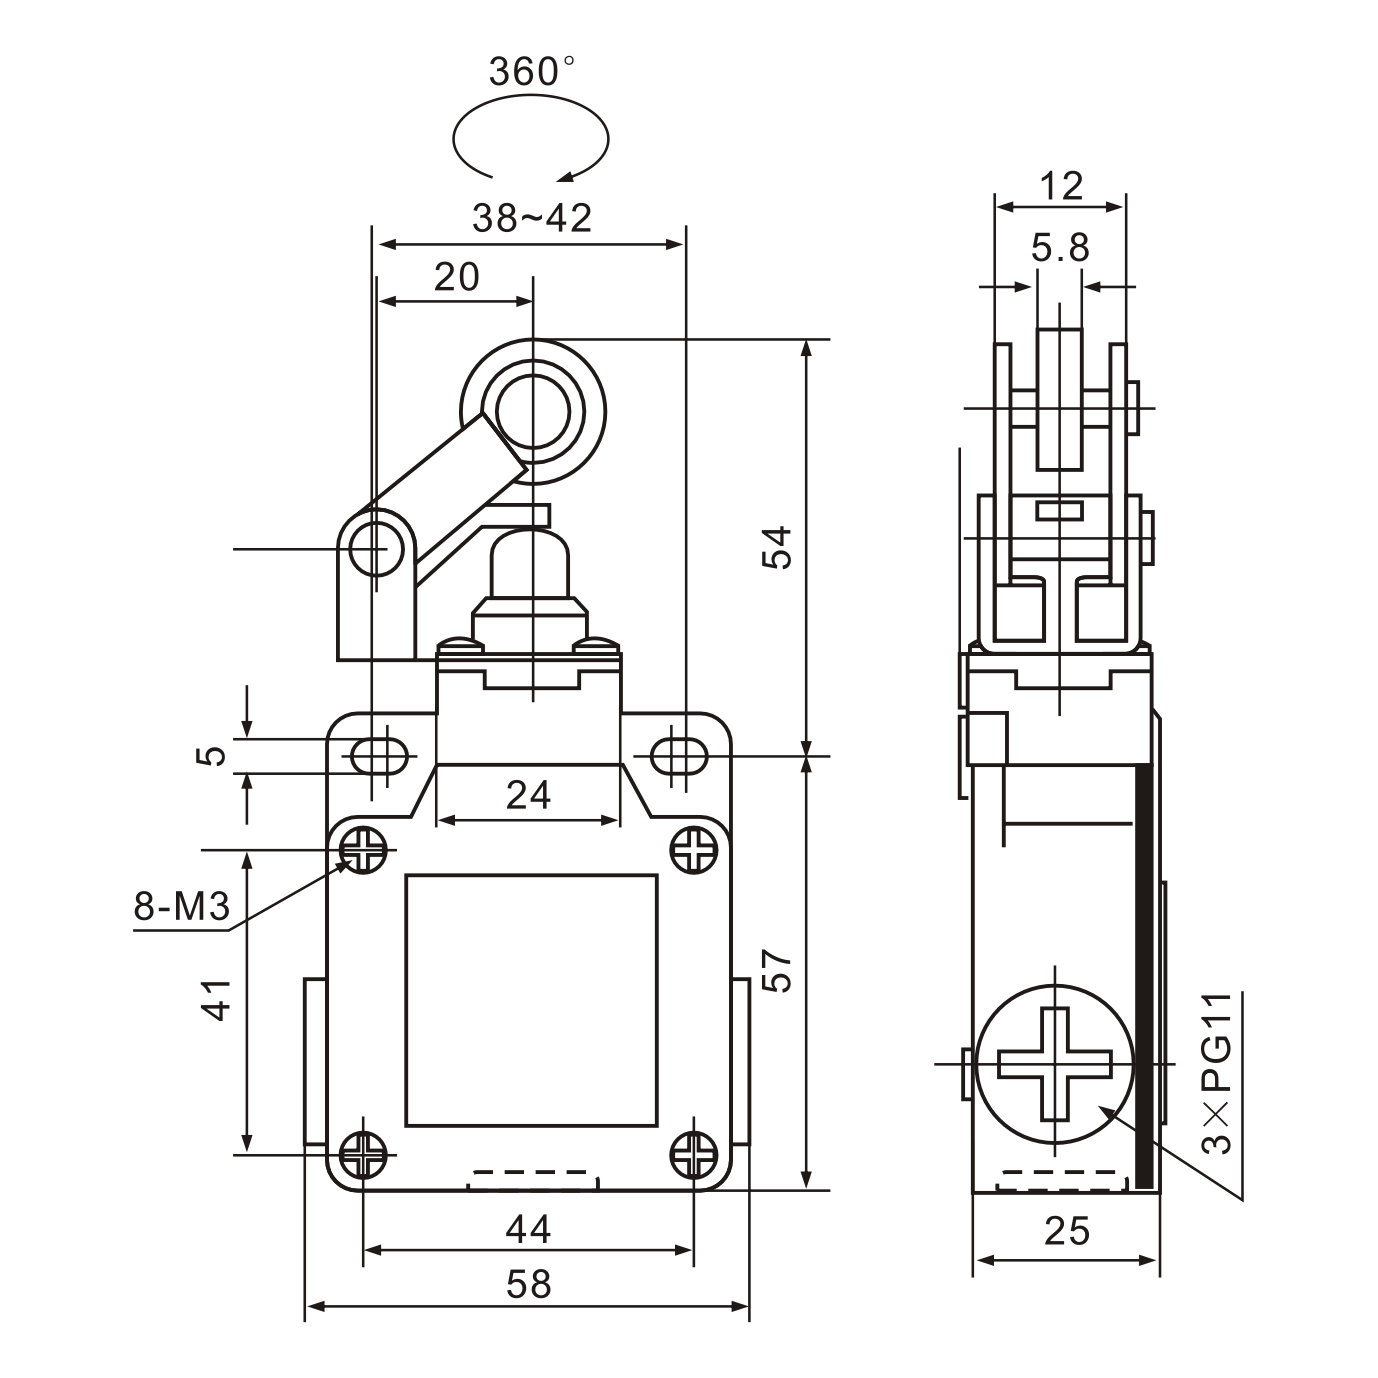 XCK-M121 Thermoplastic Roller Lever Plunger Limit Switch Diagram